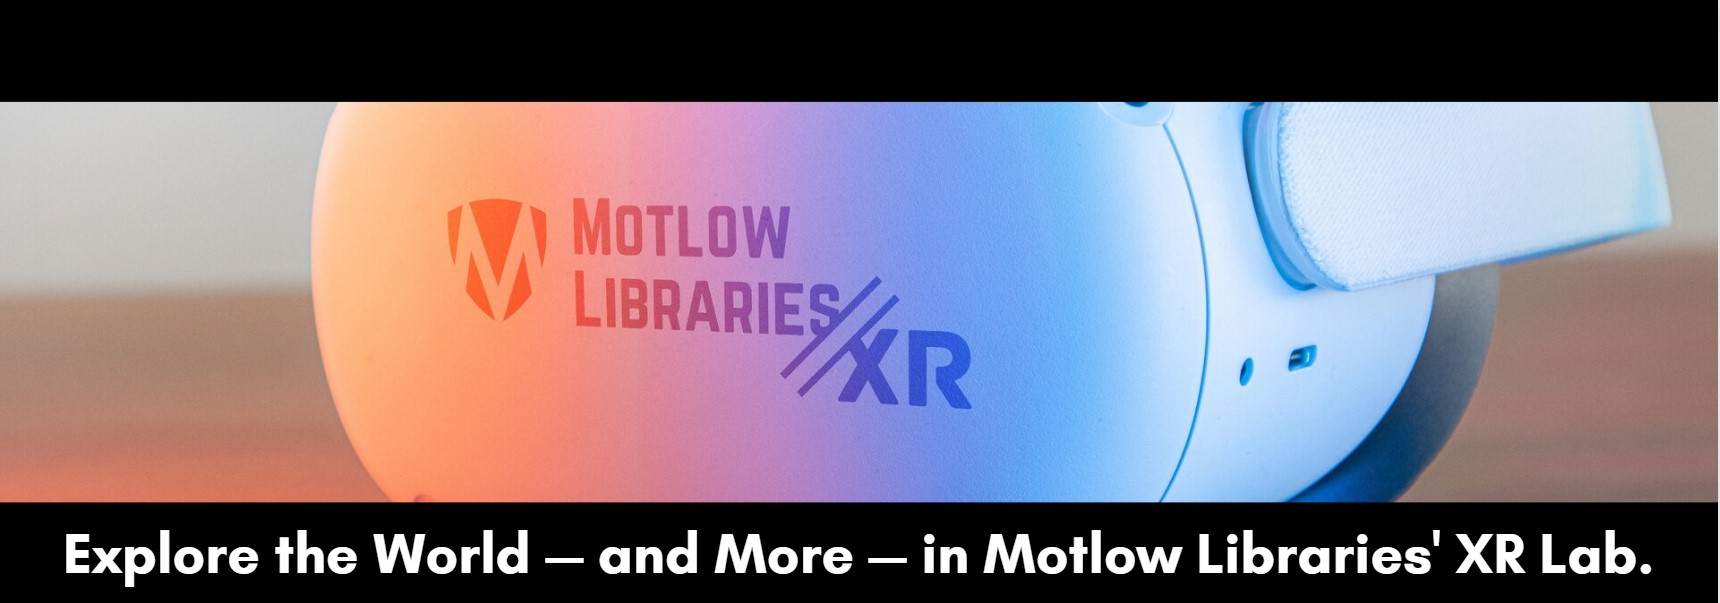 XR goggles with Motlow logo in a letterbox frame. Description: Explore the World — and More — in Motlow Libraries' XR Lab. 